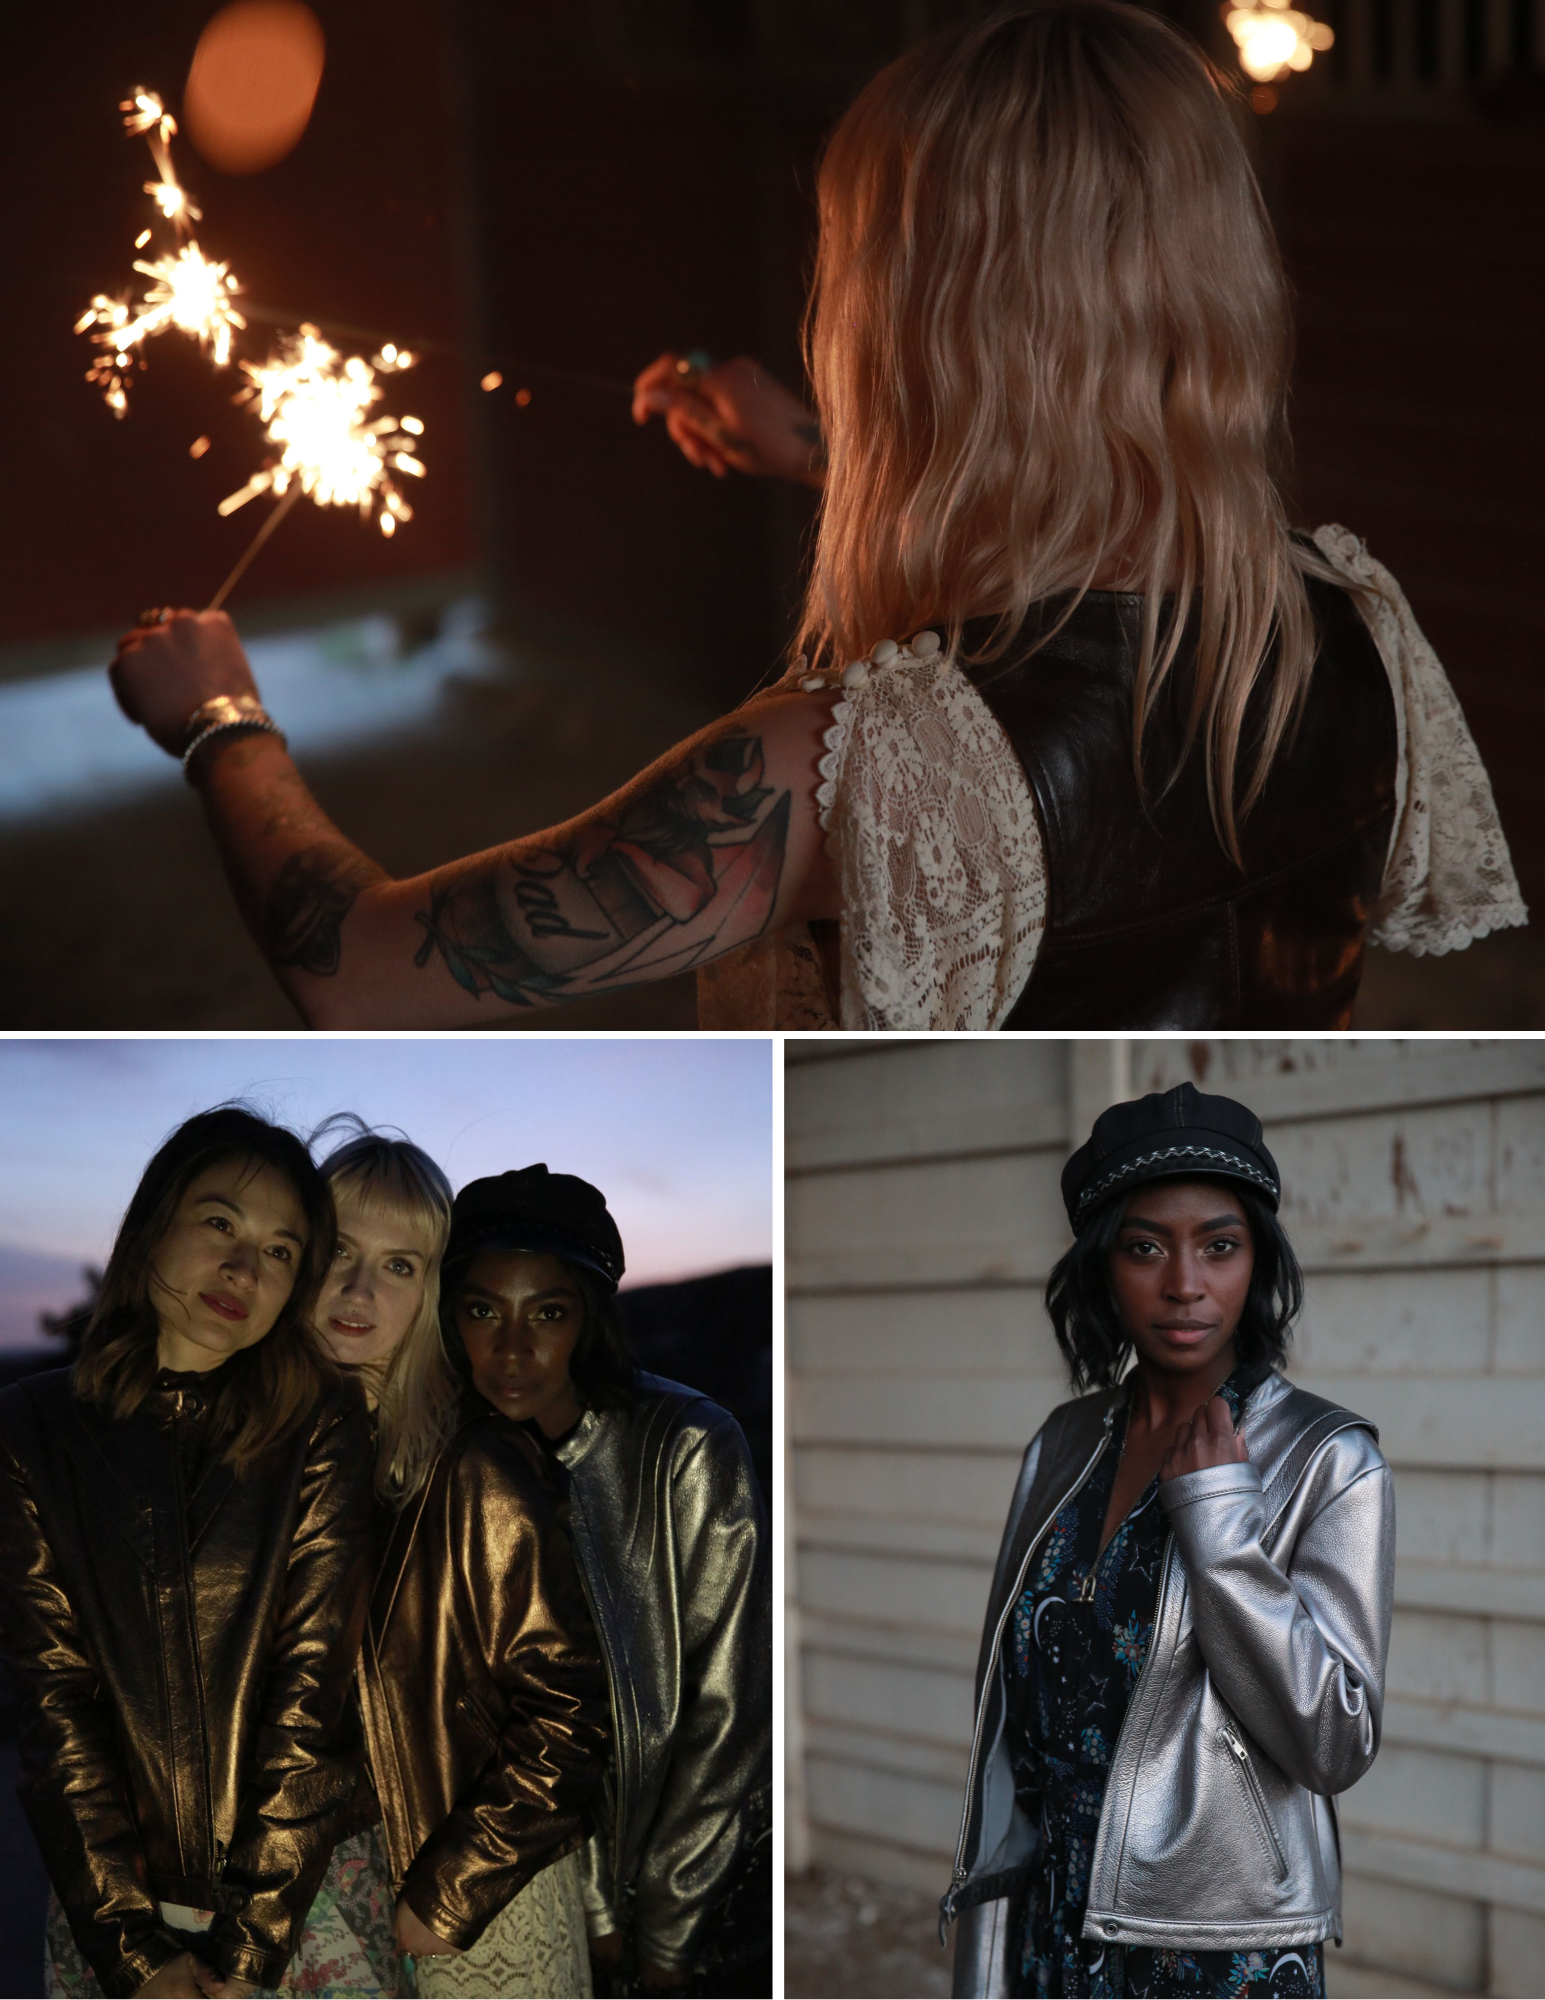 Women with sparklers wearing metallic leather jackets